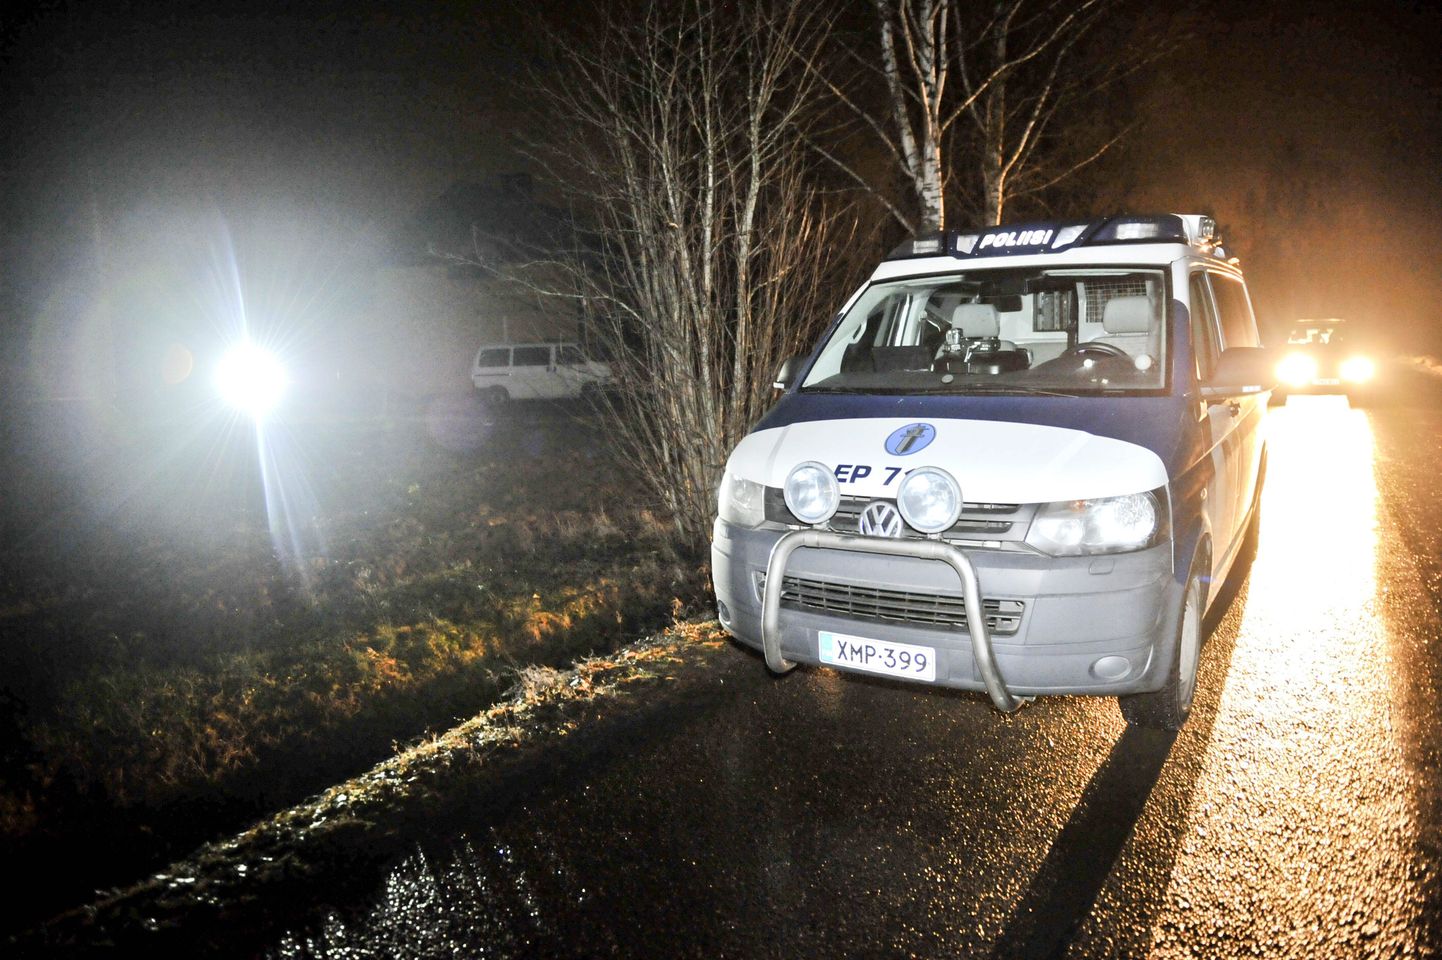 Police car outside the house in Alavus where three people have been shot to dead last night, pictured on 17th of Nov. 2012. STR / LEHTIKUVA / Janne Nousiainen *** FINLAND OUT. NO THIRD PARTY SALES. ***